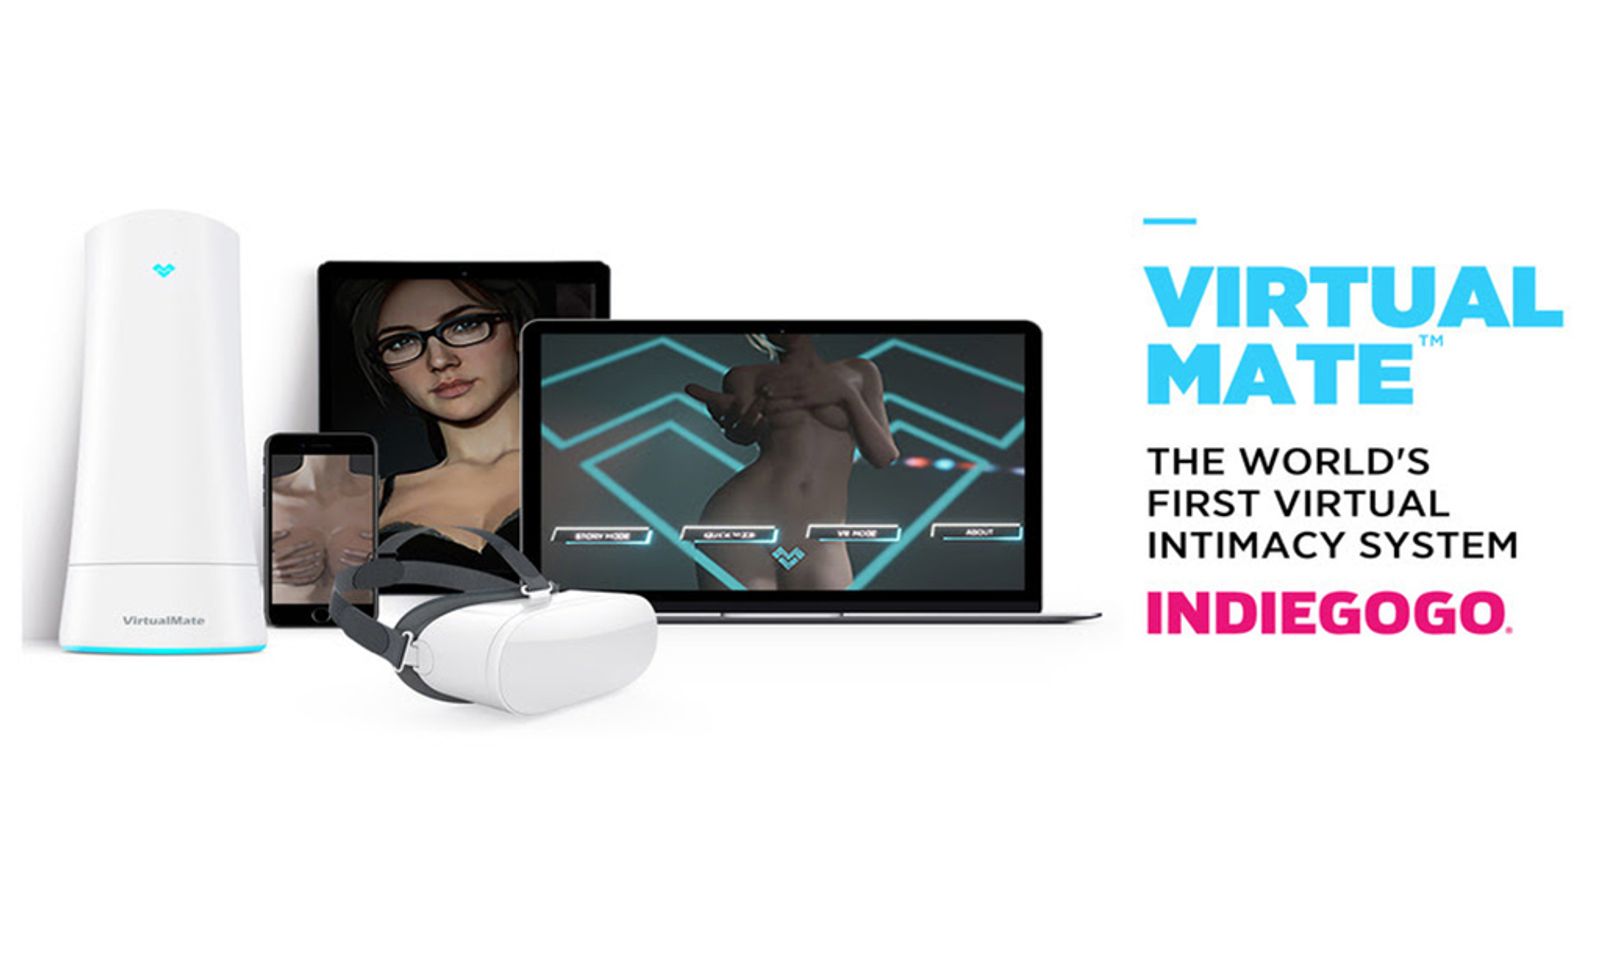 Virtual Mate Looking to Crowdfund its Haptic Intimacy System